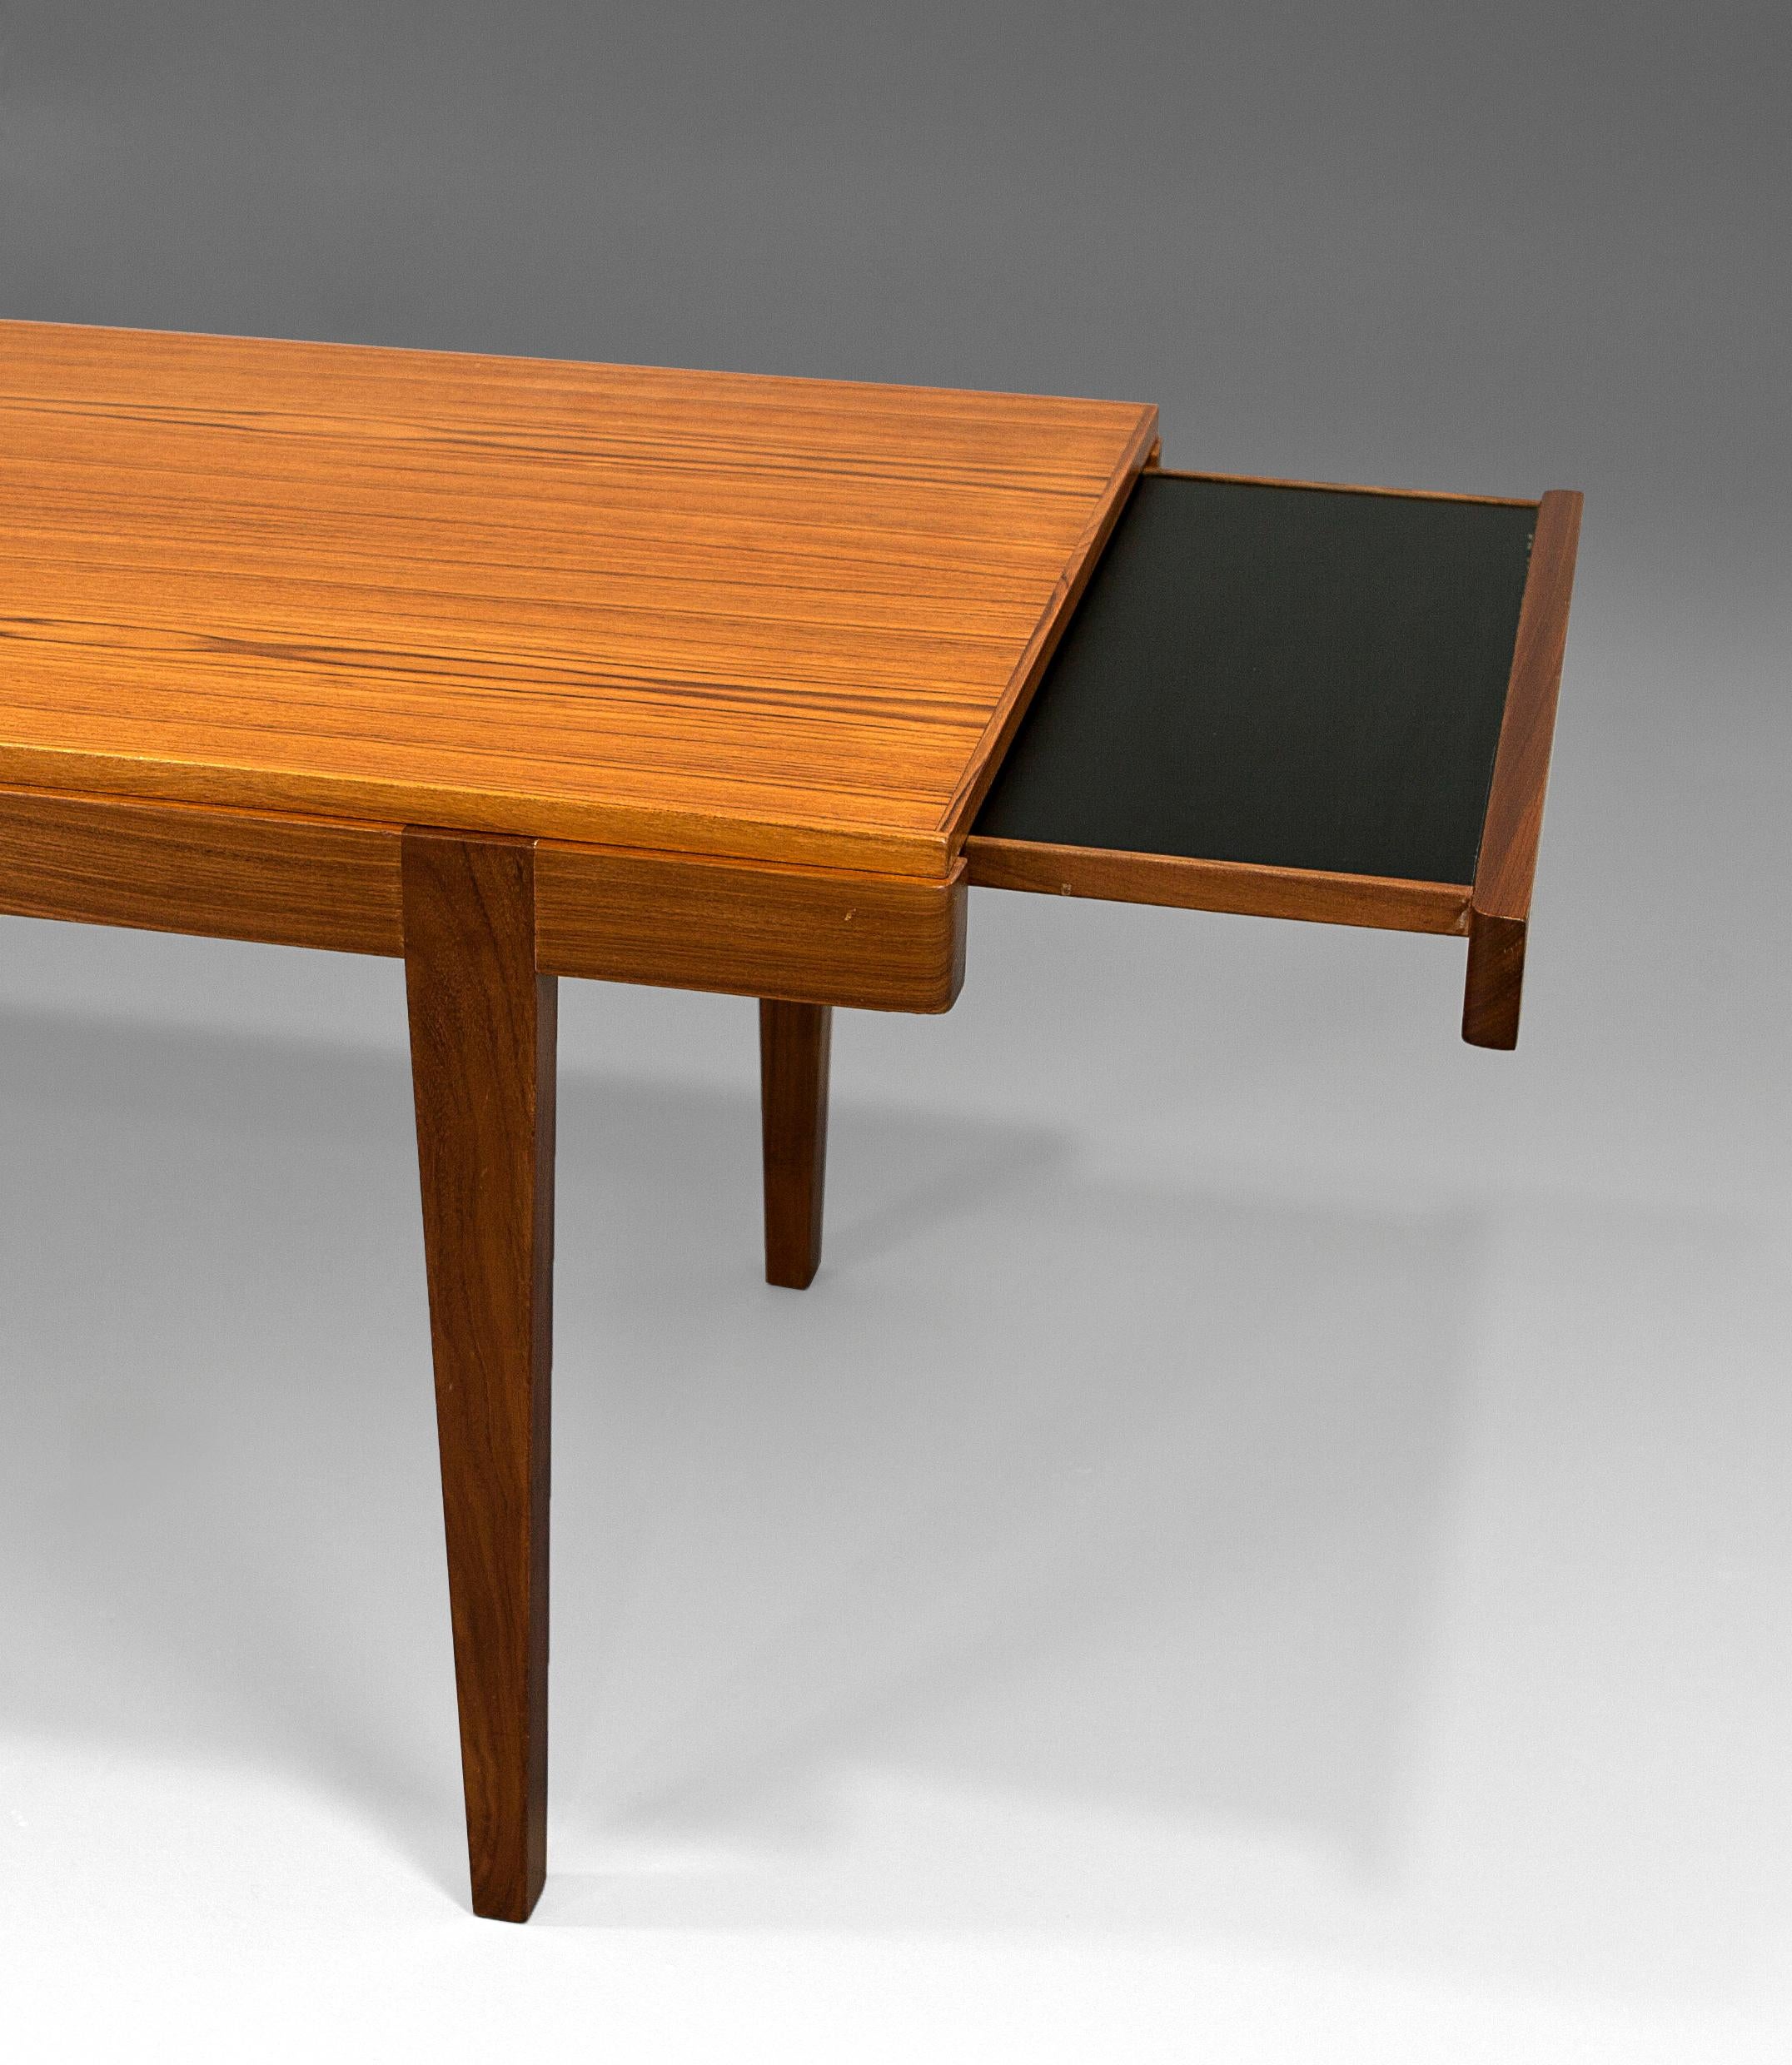 Coffe table, probably swedish, en teak with removable extensions in formica laminate, 60's.
Mint condition, fully refinished.
 